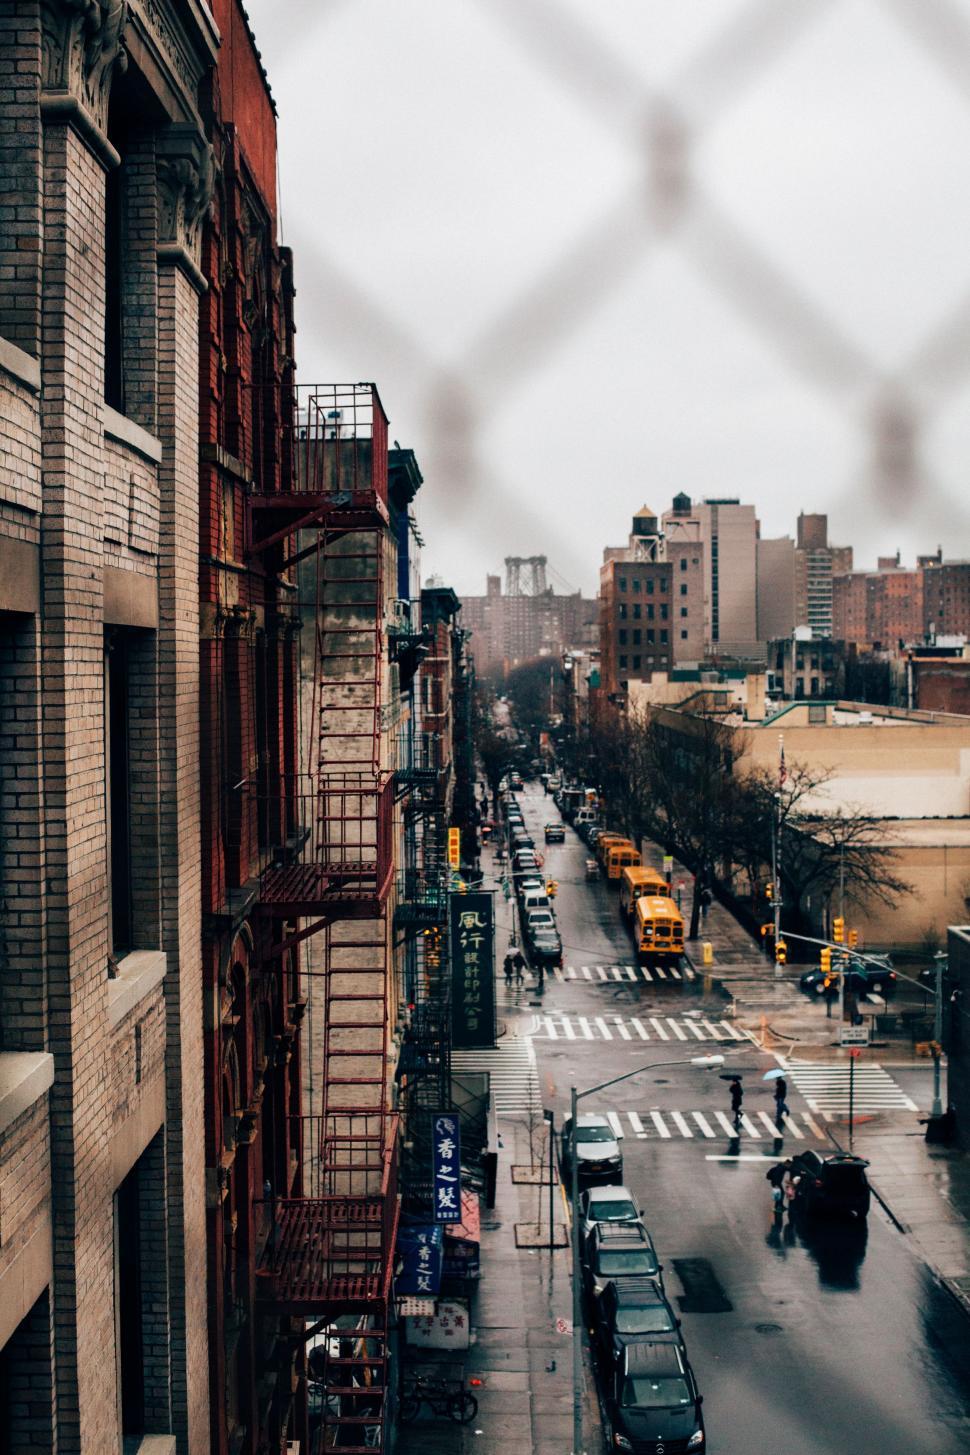 Free Image of City Street View Through Chain Link Fence 